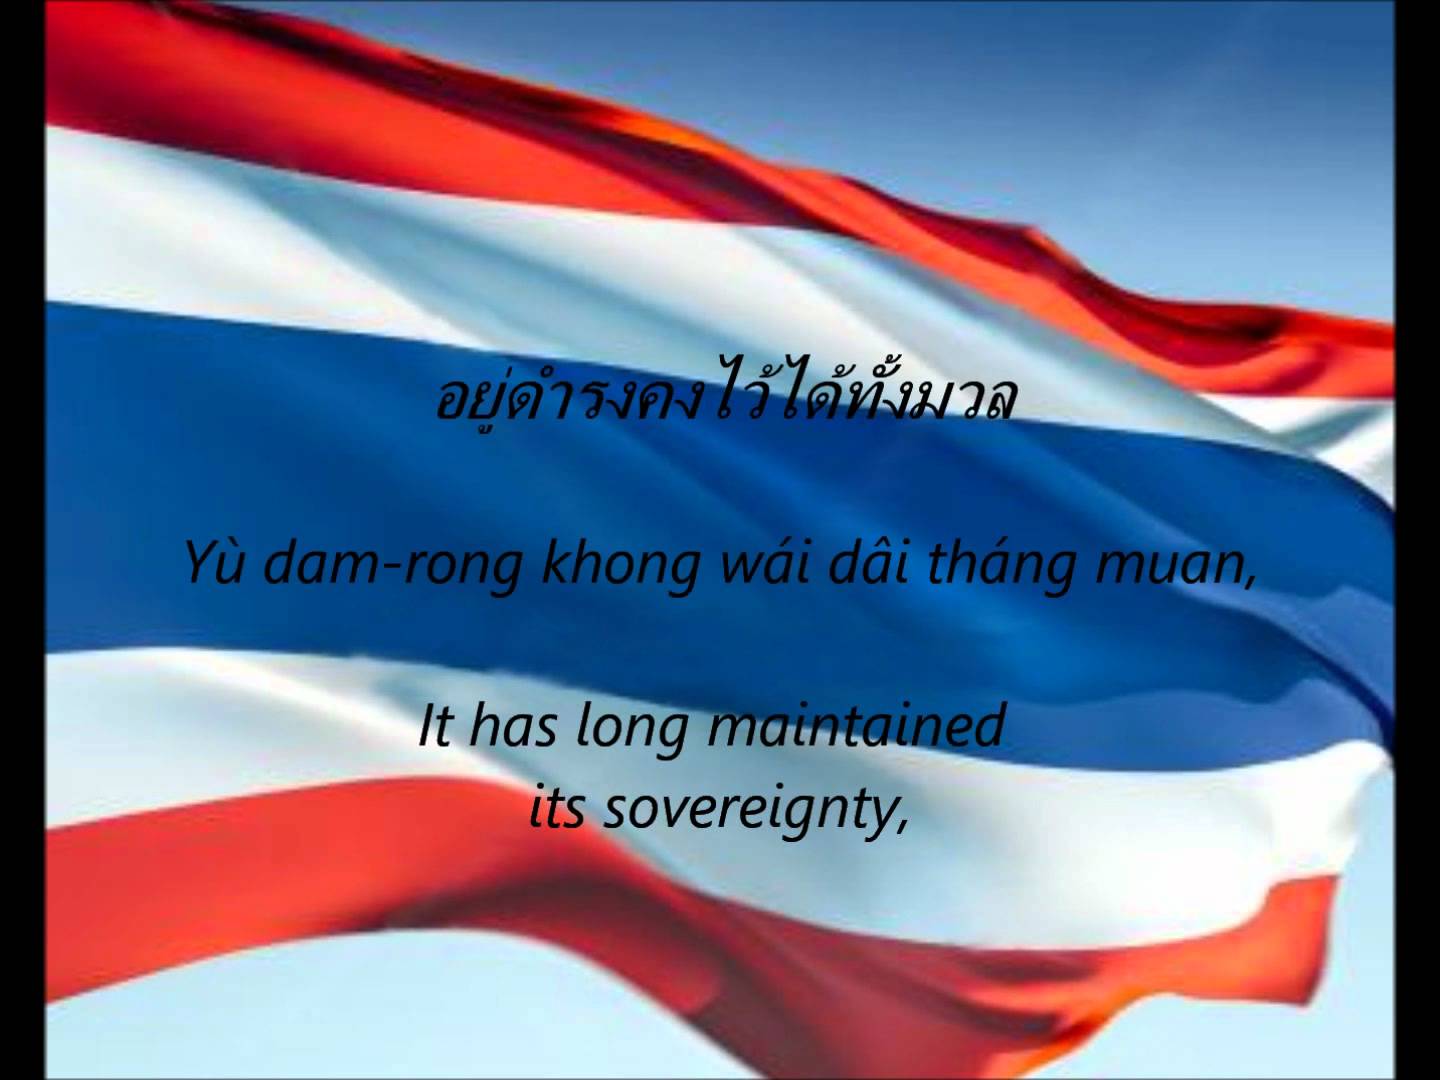 Phleng Chat Thai - The National Anthem of Thailand